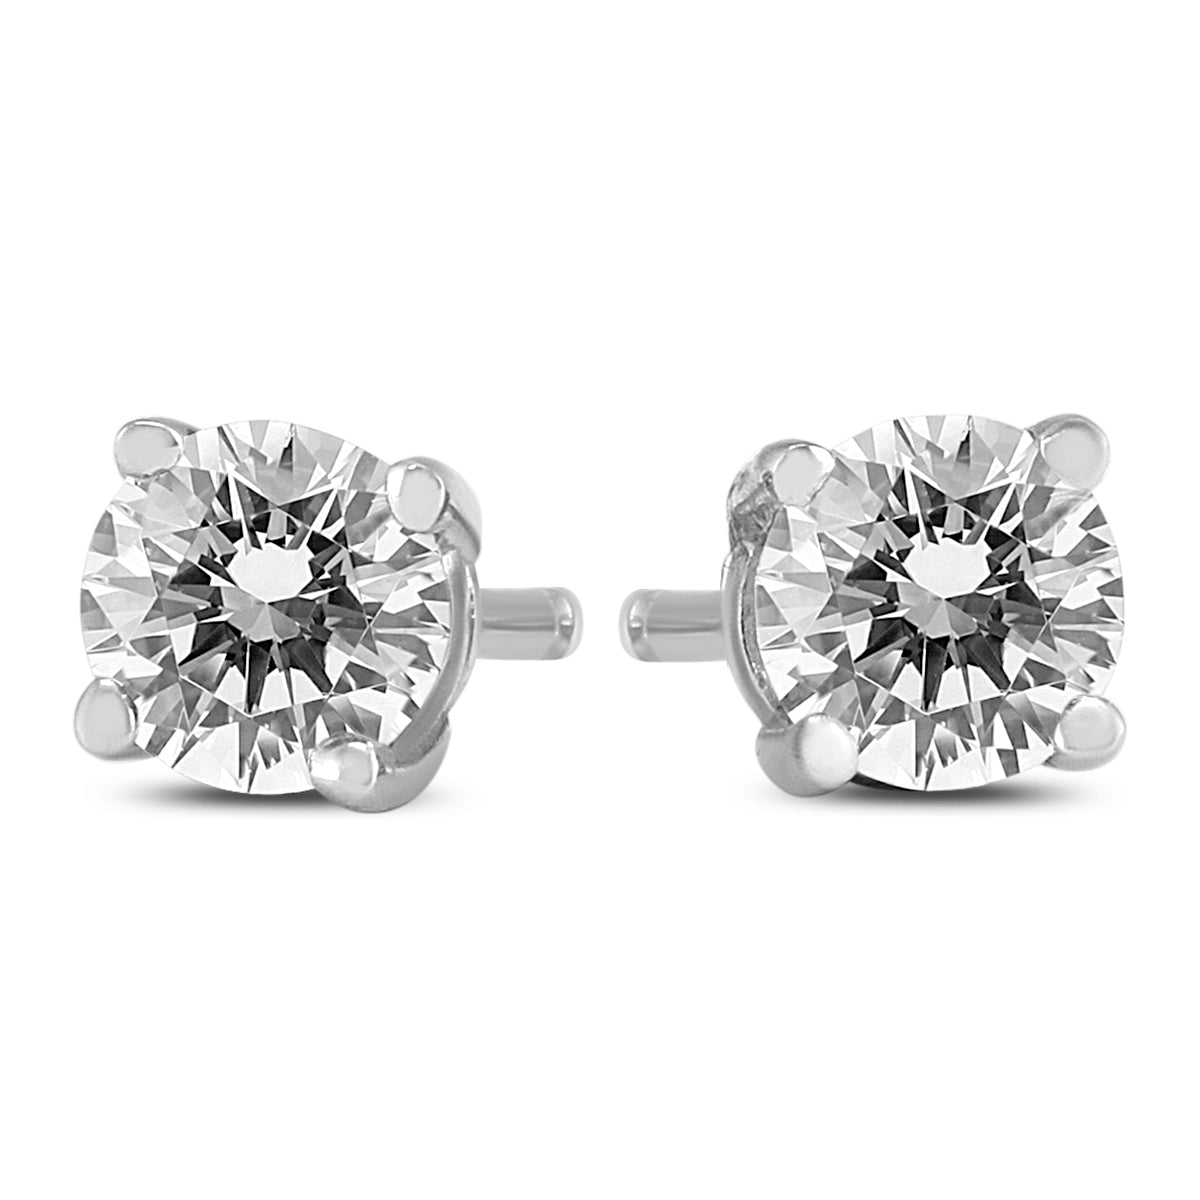 1/2 CARAT TW ROUND DIAMOND SOLITAIRE EARRINGS IN 14K WHITE GOLD